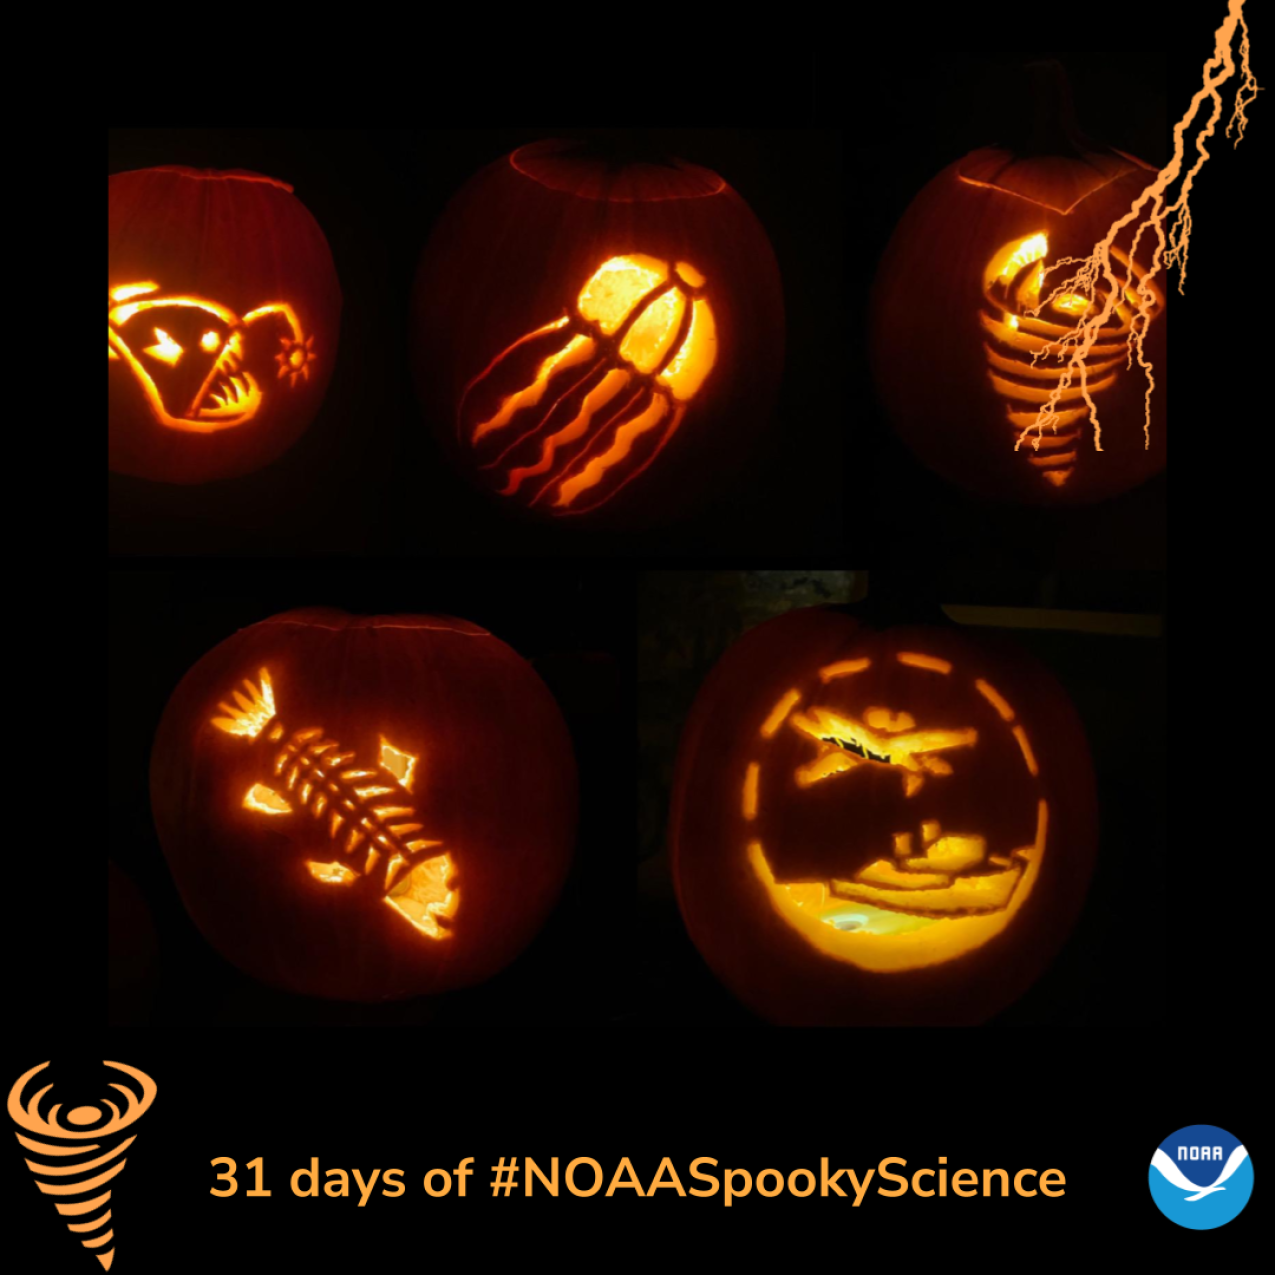 Five pumpkins carved with different NOAA-themed templates including an anglerfish, a jellyfish, a tornado, a bony fish, and a ship and plane. Border of the photo is black with orange atmospheric graphics of a lightning bolt and a tornado. Text: 31 days of #NOAASpookyScience